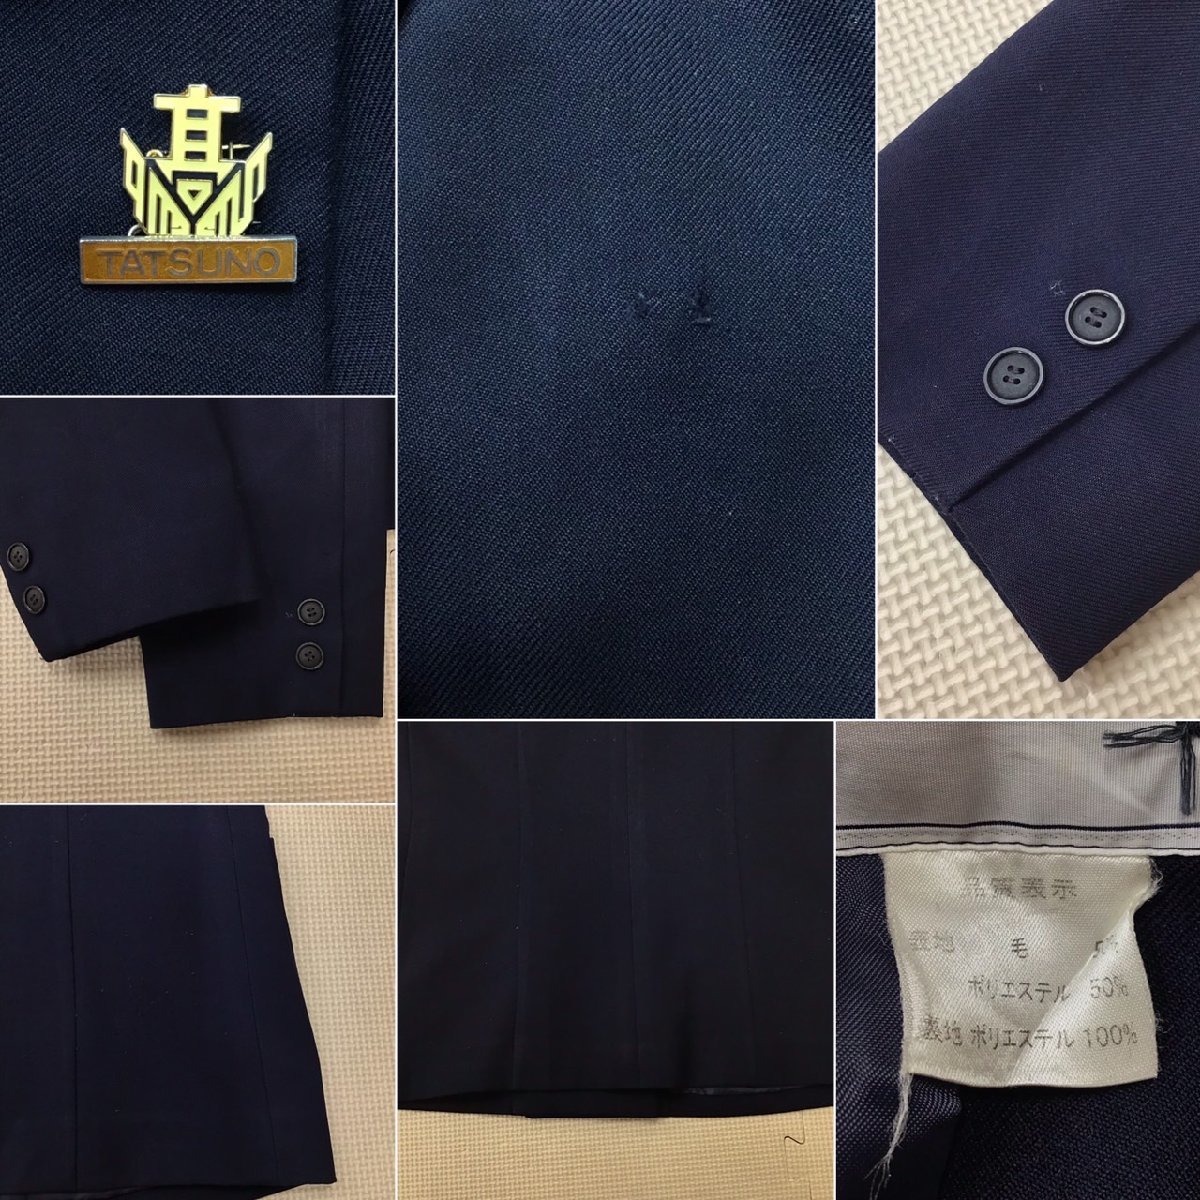 O128/( used ) Hyogo prefecture Tatsuno high school woman uniform 3 point /. chapter /M/W63/ height 63/ blaser / blouse / skirt /NIKKE/ navy blue / winter clothes / middle ./ high school / woman student / uniform / school uniform 